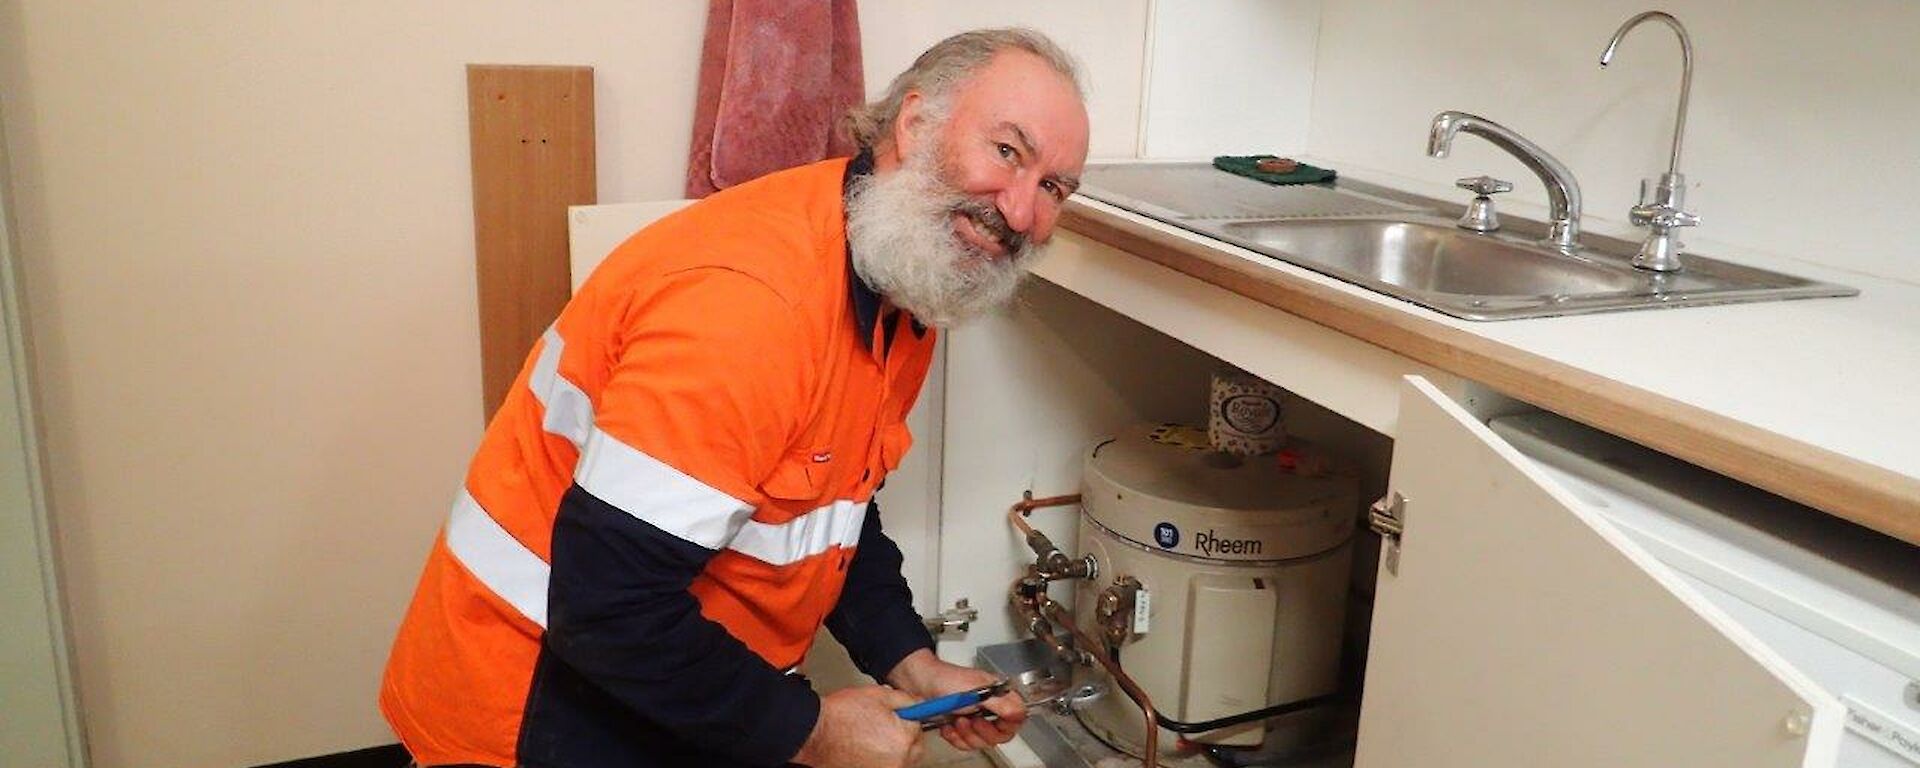 A man smiles at camera as he works on under sink plumbing